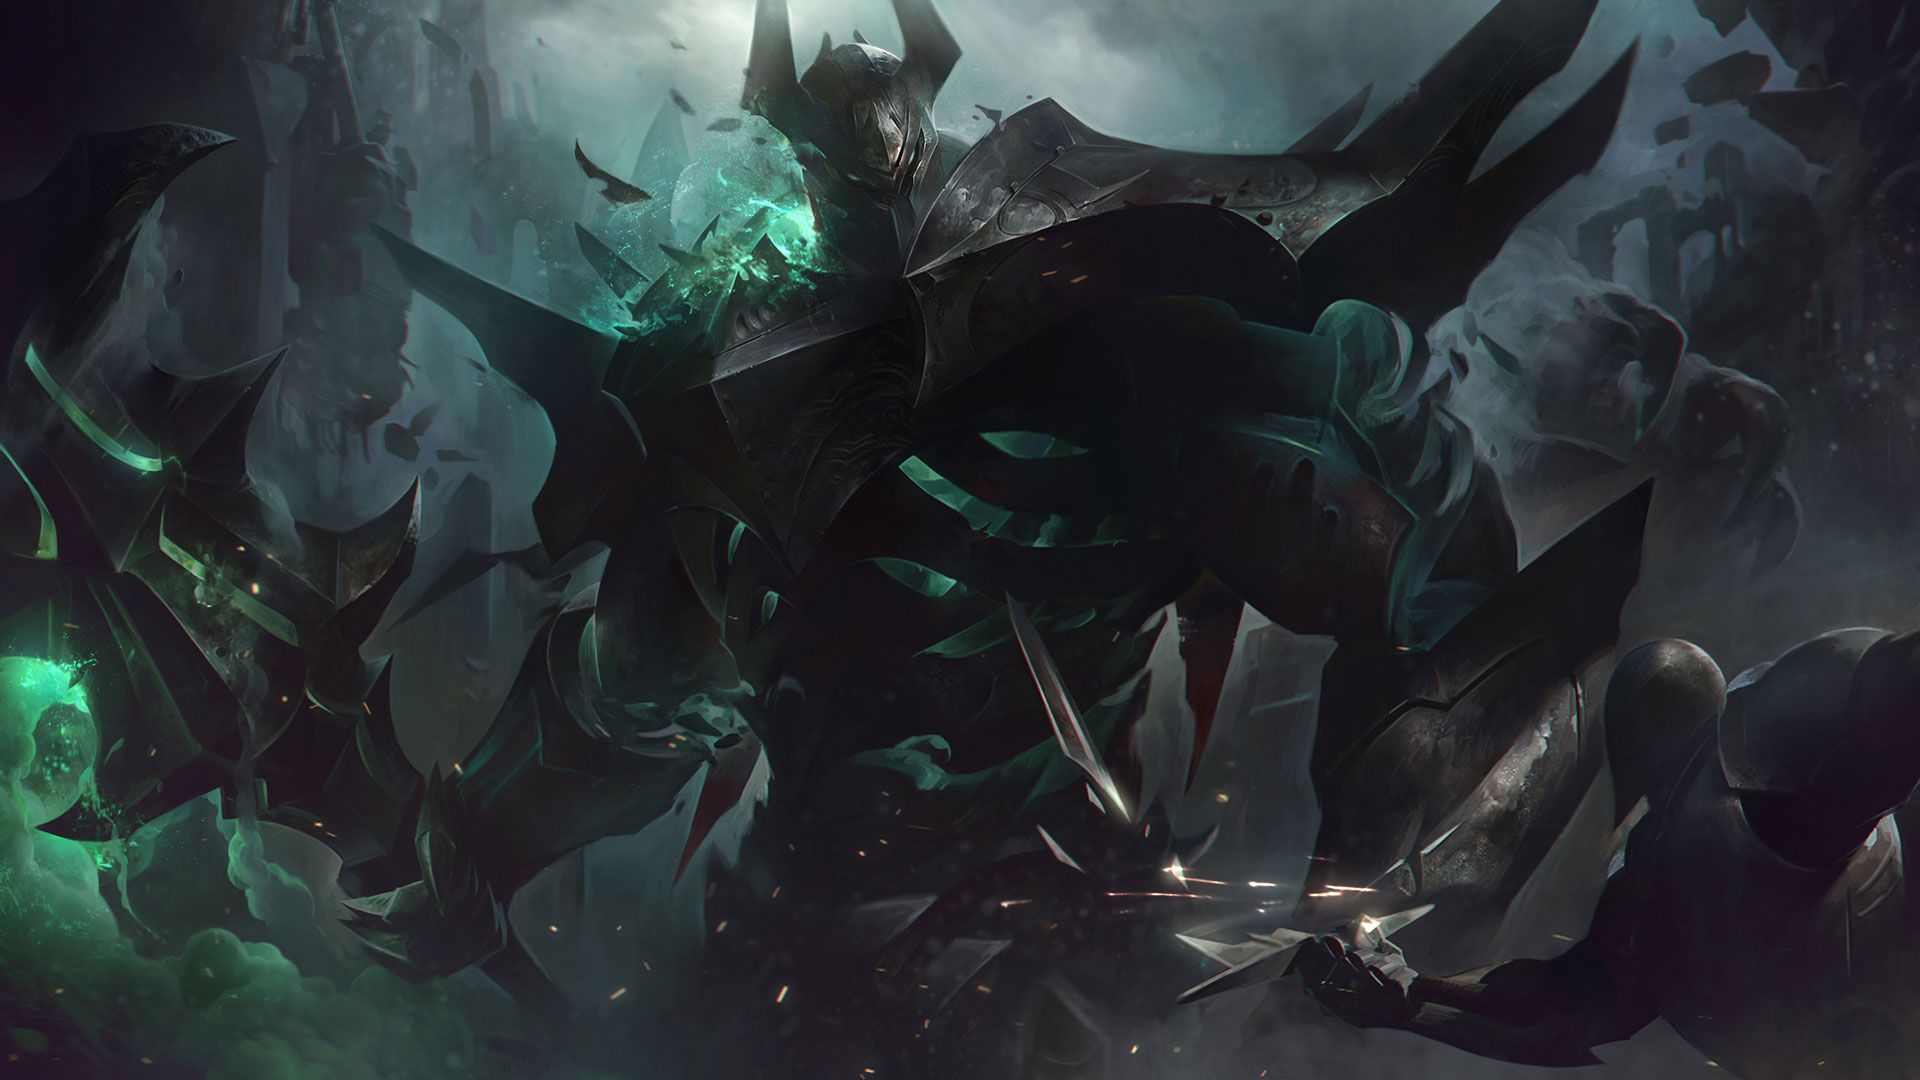 In Black Armor with a Glowing Green Mace, Mordekaiser Rework Revealed